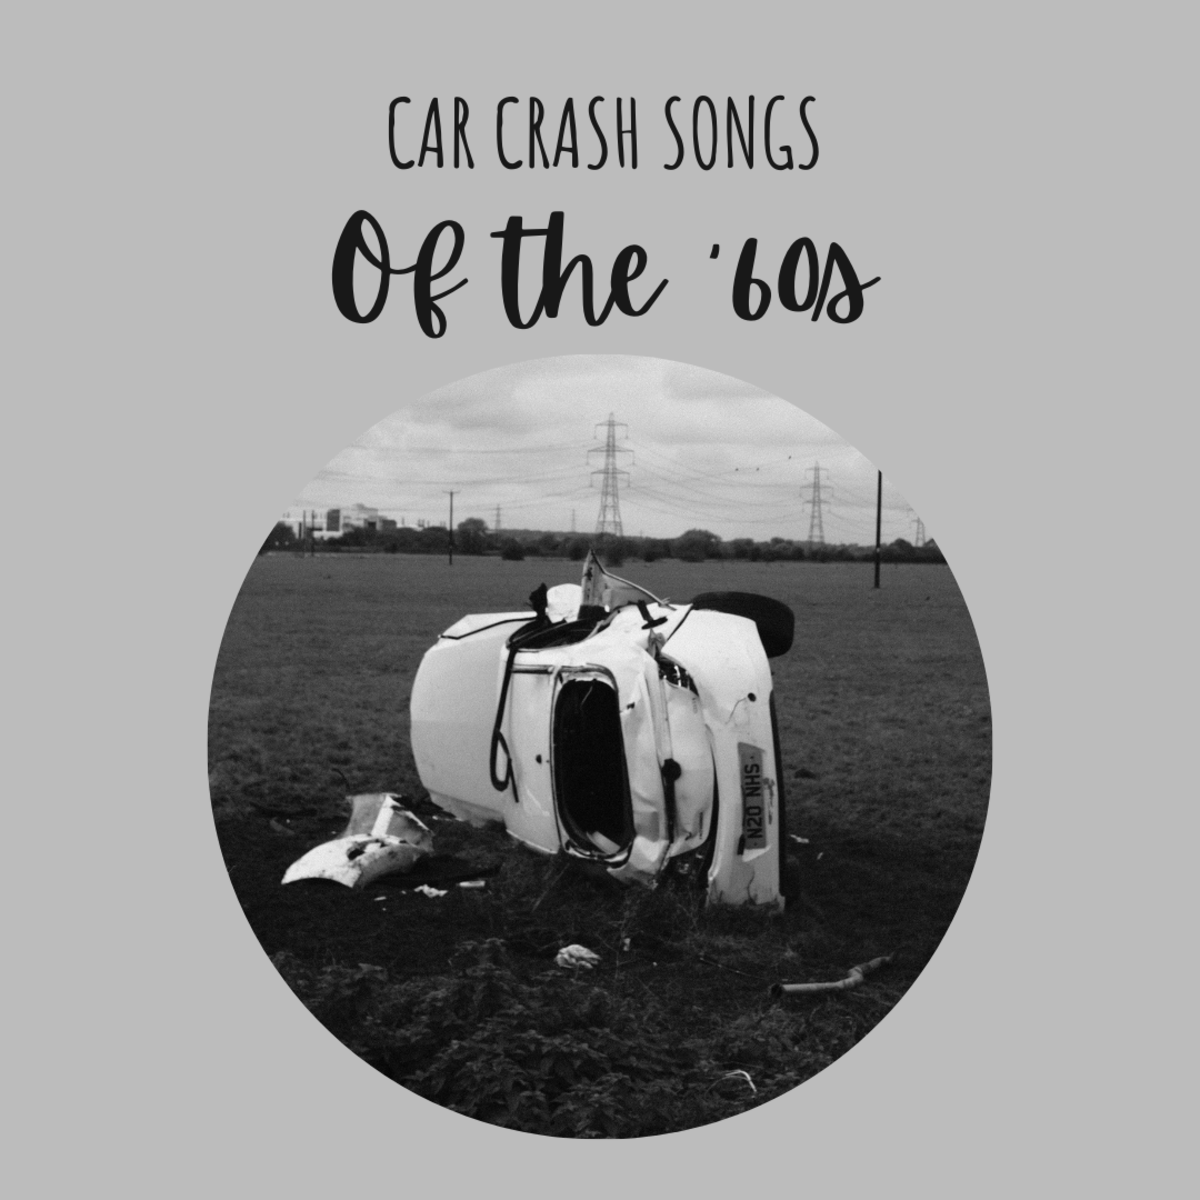 Top 10 Car Crash Songs of the 1960s